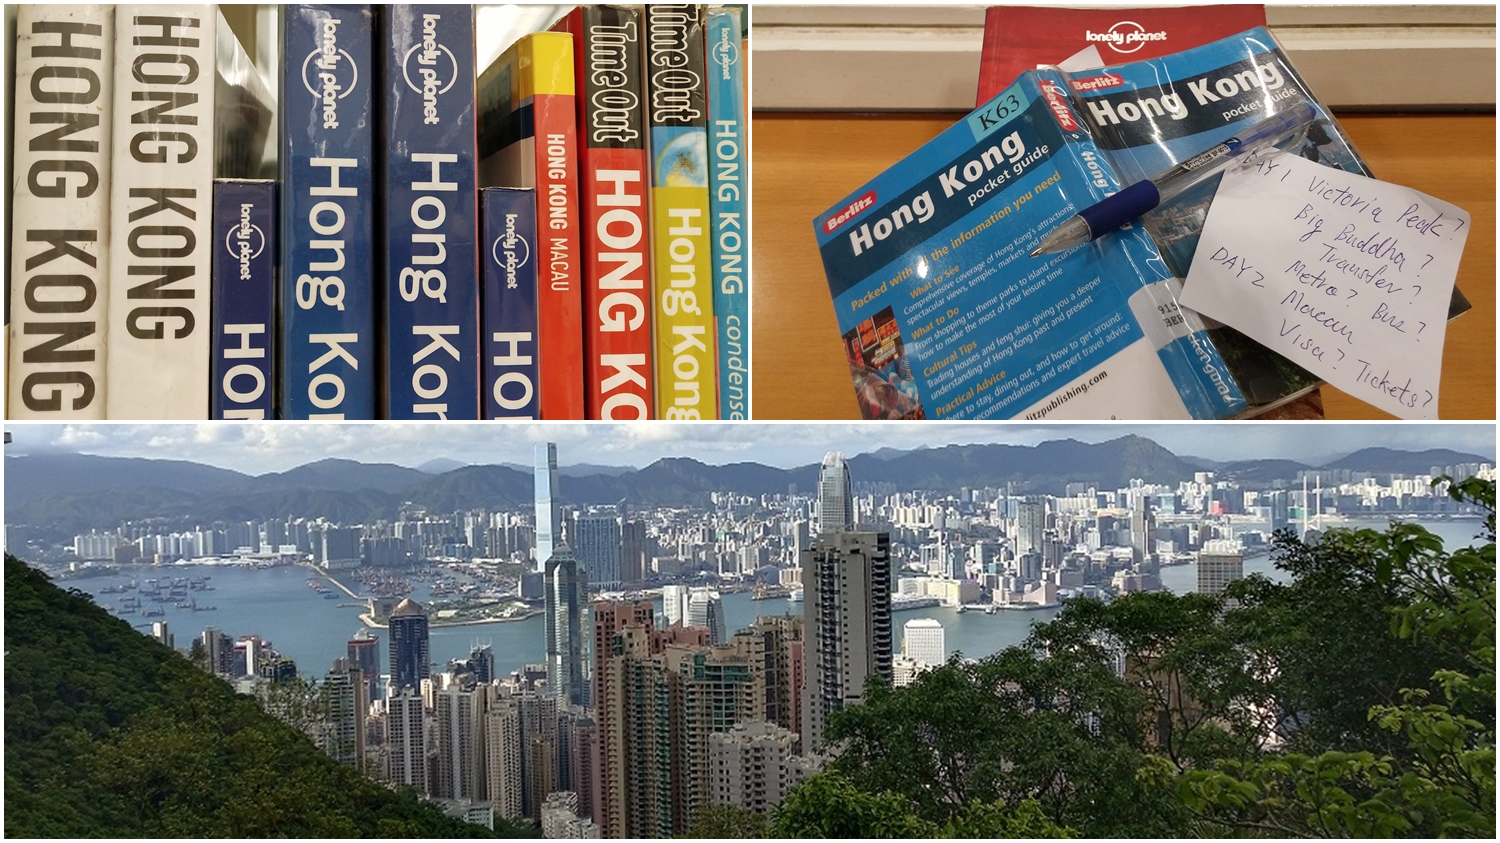 Four common mistakes of travelers planning Hong Kong trips